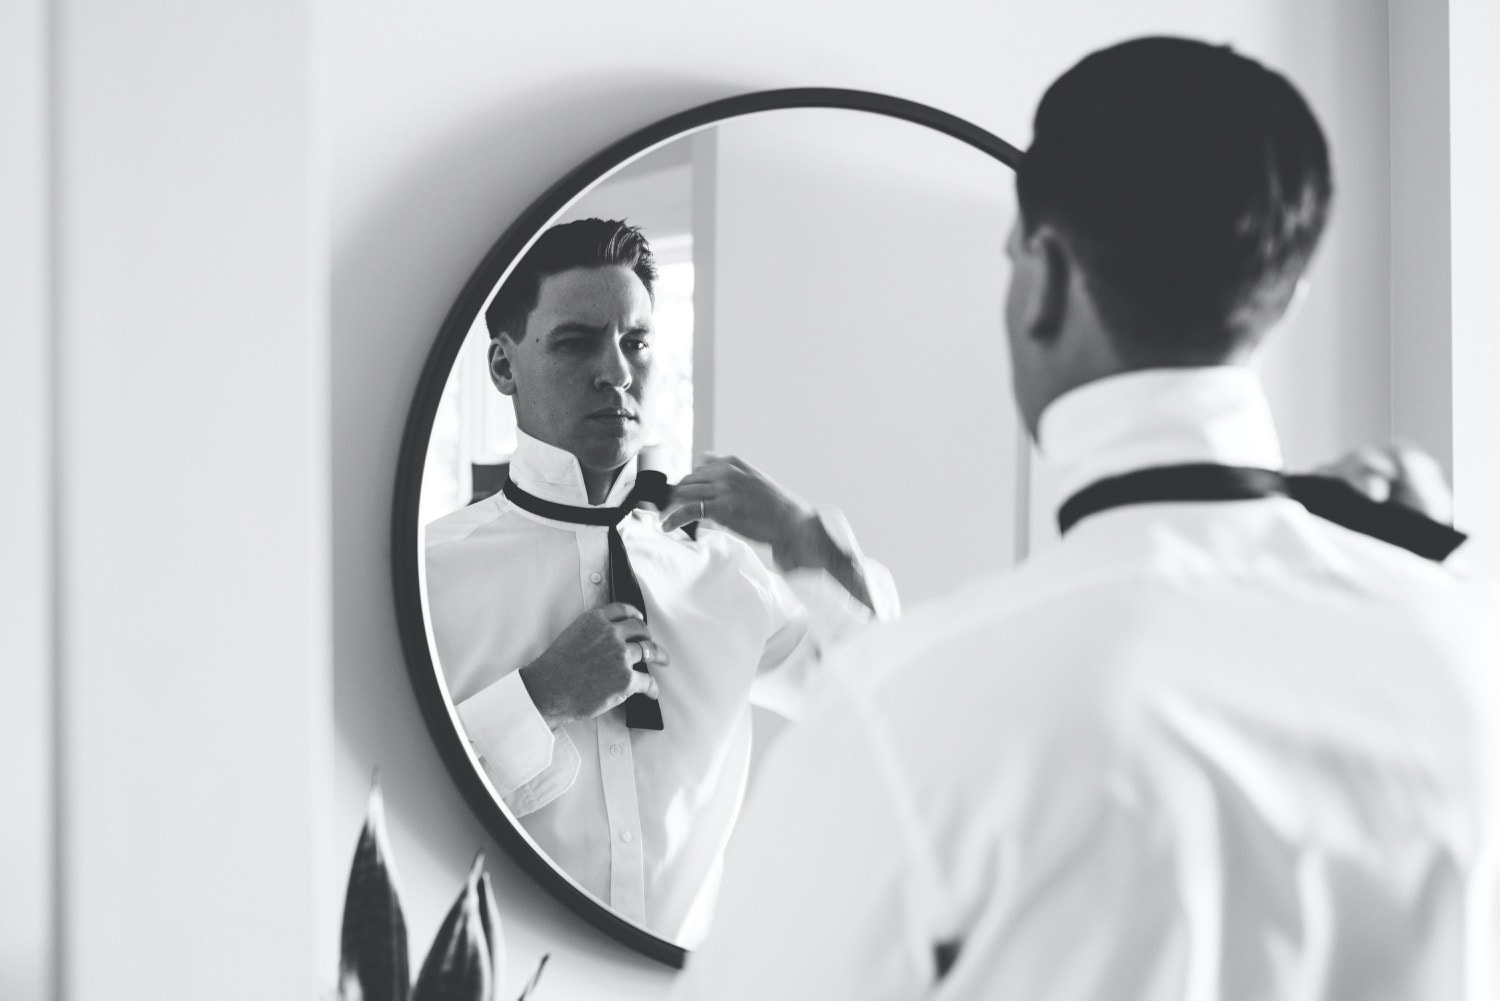 Black and White image of groom getting ready in mirror reflection